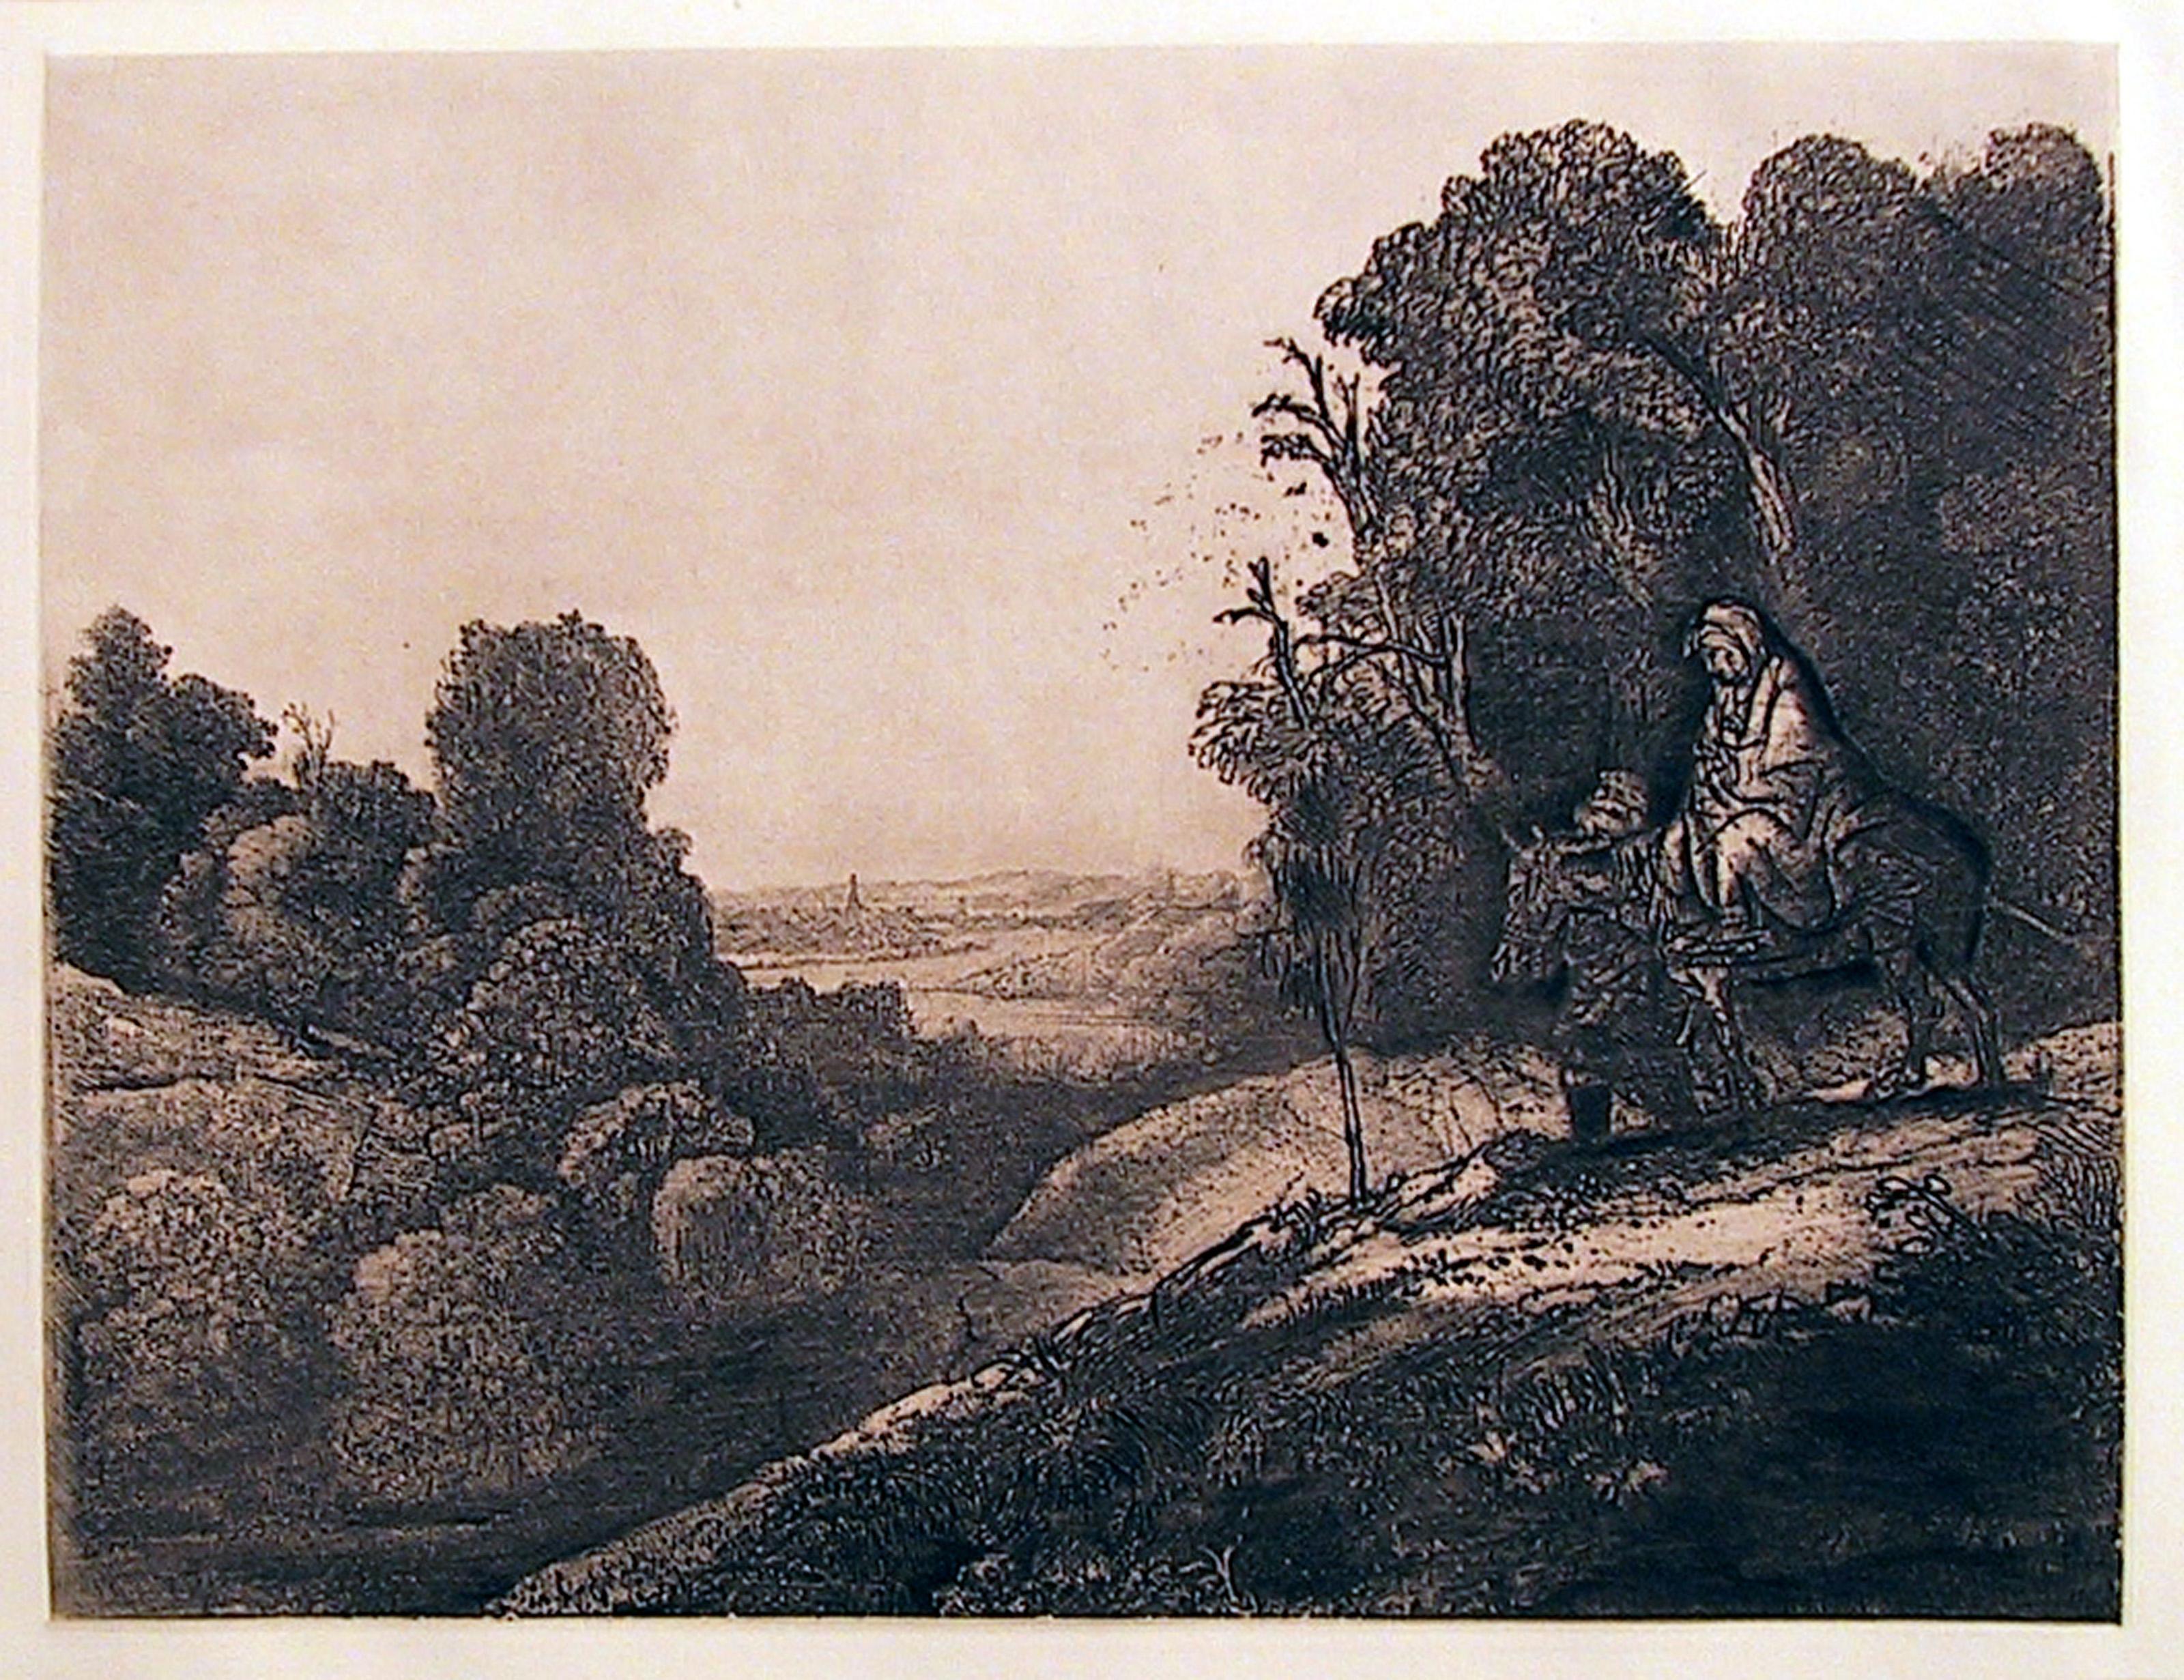  Rembrandt van Rijn, After by Amand Durand, Dutch (1606 - 1669) - The Flight into Egypt: Altered from Seghers, Year: Of Original 1653, Medium: Etching, Image Size: 8.5 x 11 inches, Size: 17  x 18 in. (43.18  x 45.72 cm), Printer: Amand Durand,